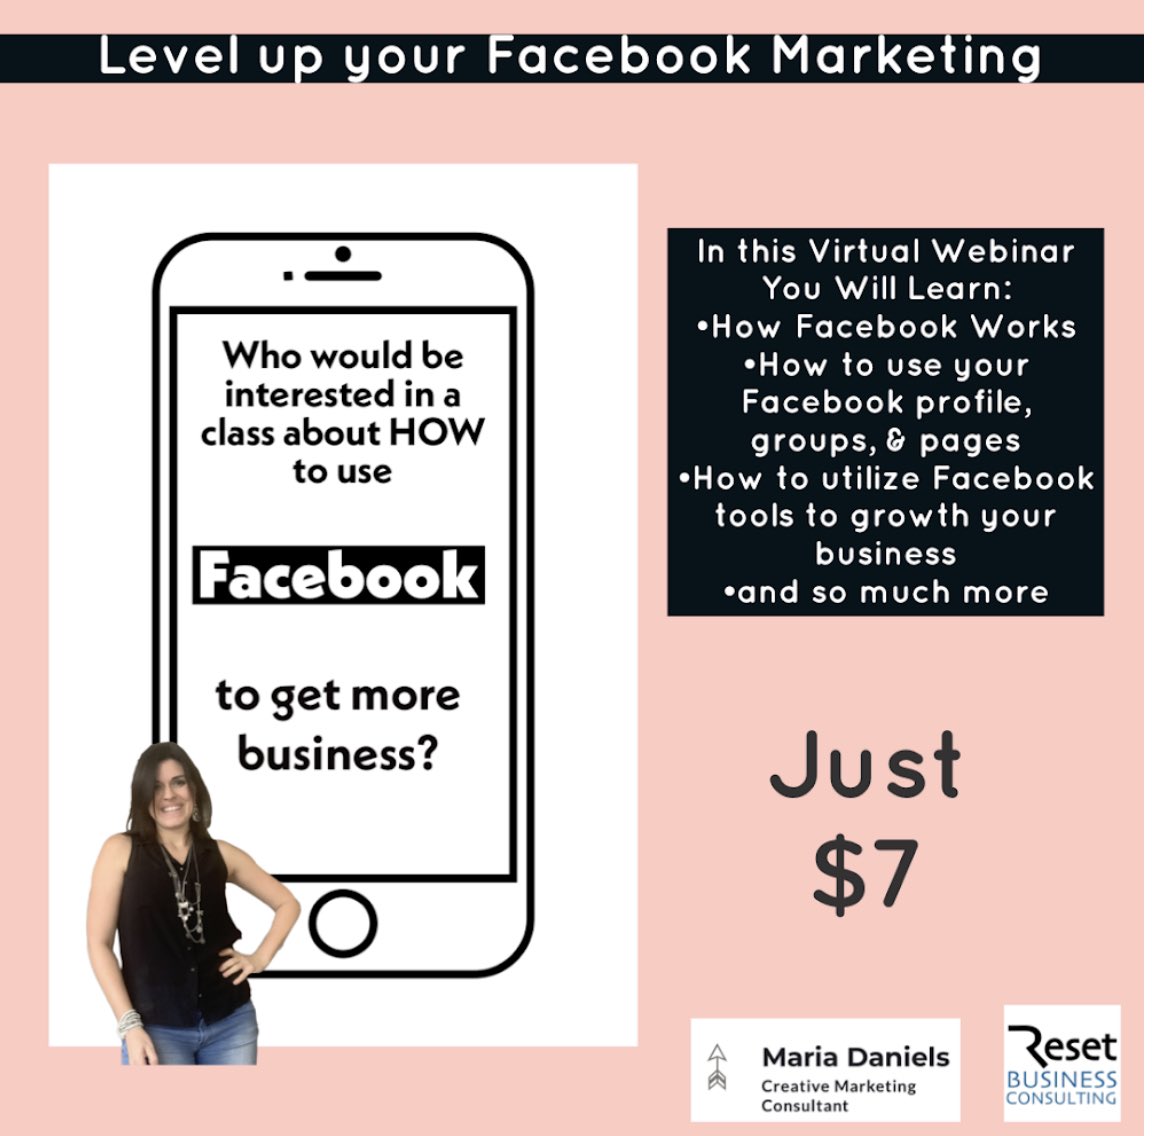 Facebook Marketing Doesn't Have to be Difficult.
Unlock Your Own Marketing Sauce & Get the Secrets That Work! getmarketingsauce.com/find-your-face…

#levelup #levelup⬆️ #selfknowledge #selfknowledgeispower #facebook #smallbusinessowner #smallbusiness #entrepreneur getmarketingsauce.com/find-your-face…